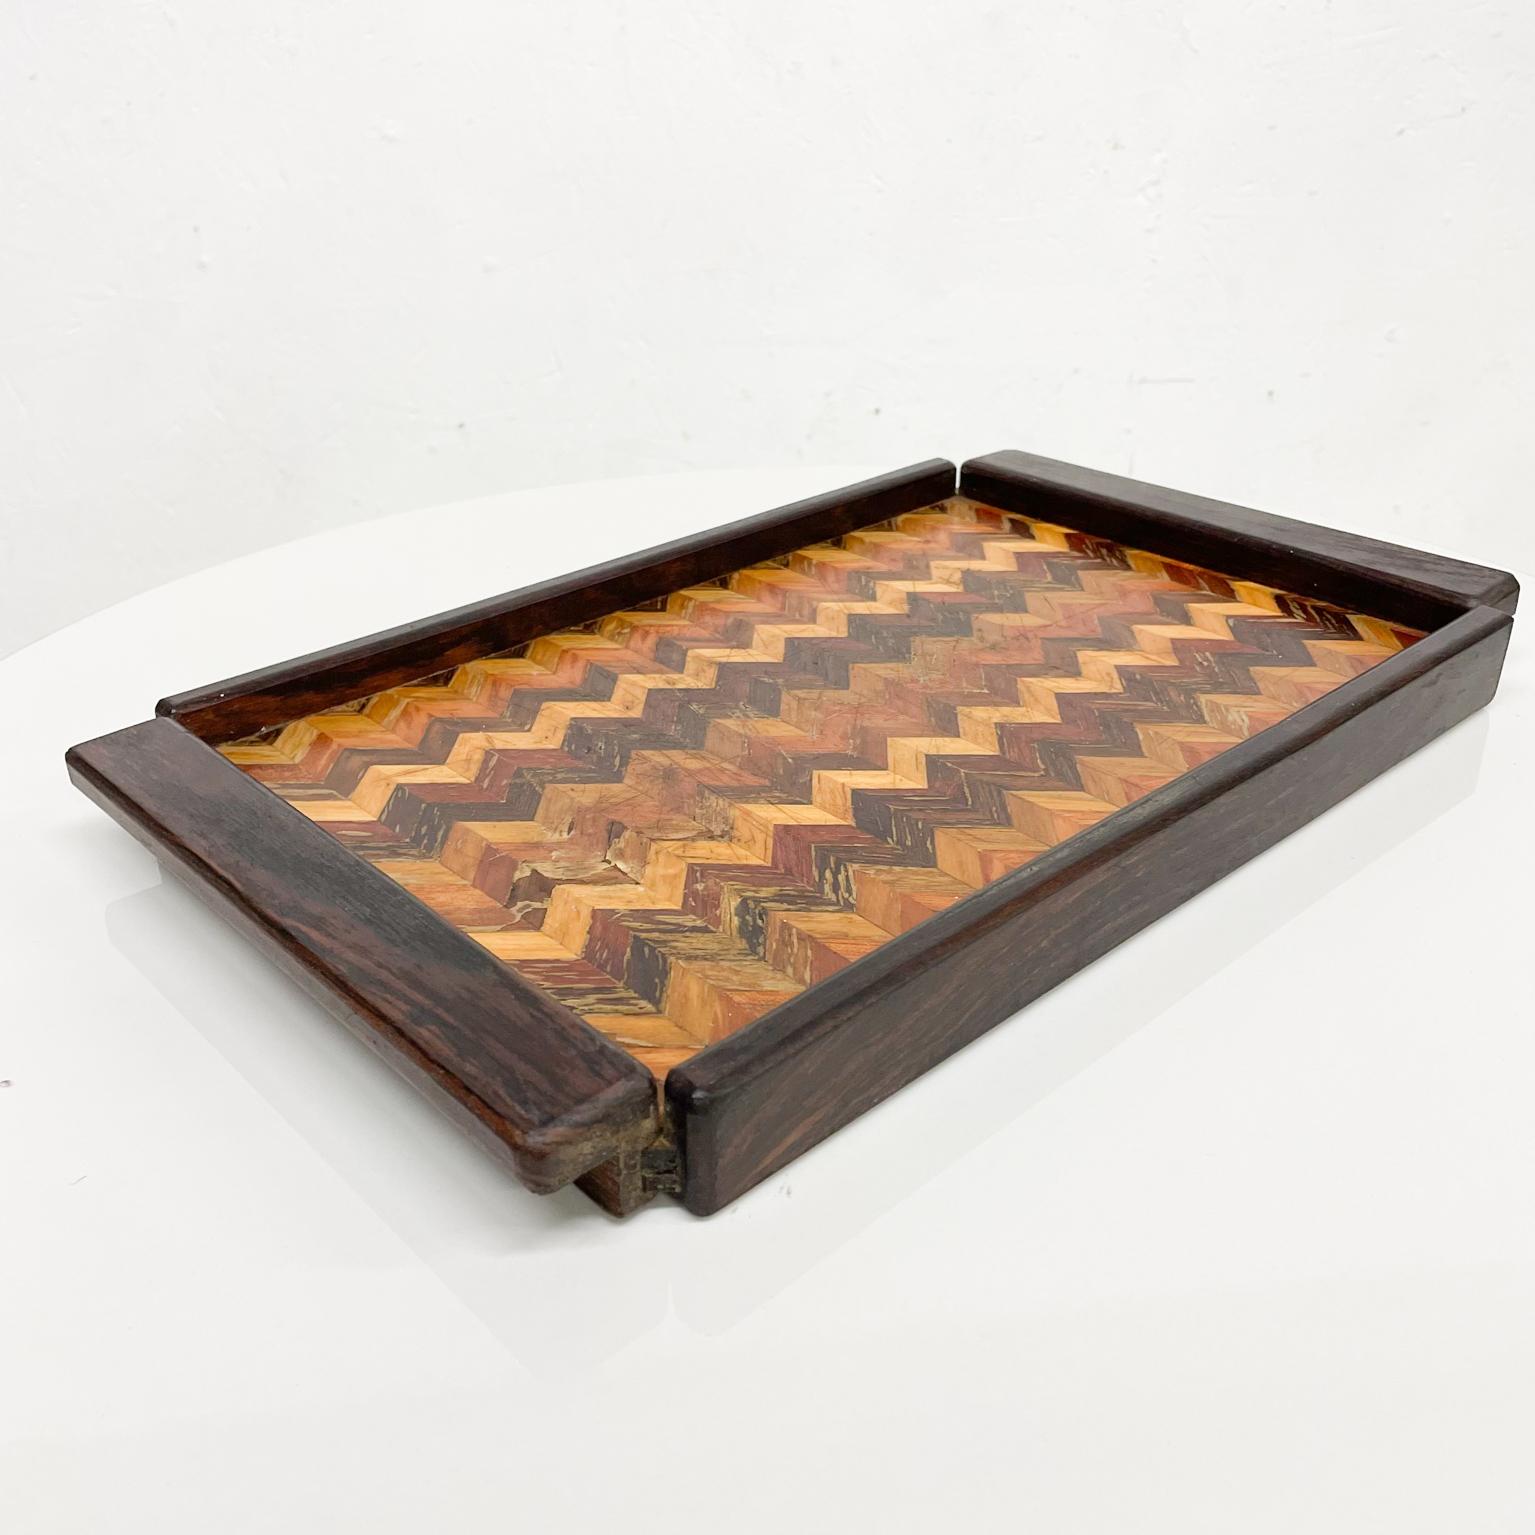 1950s Don Shoemaker Señal Serving Tray in Cocobolo Exotic Wood from Mexico 2